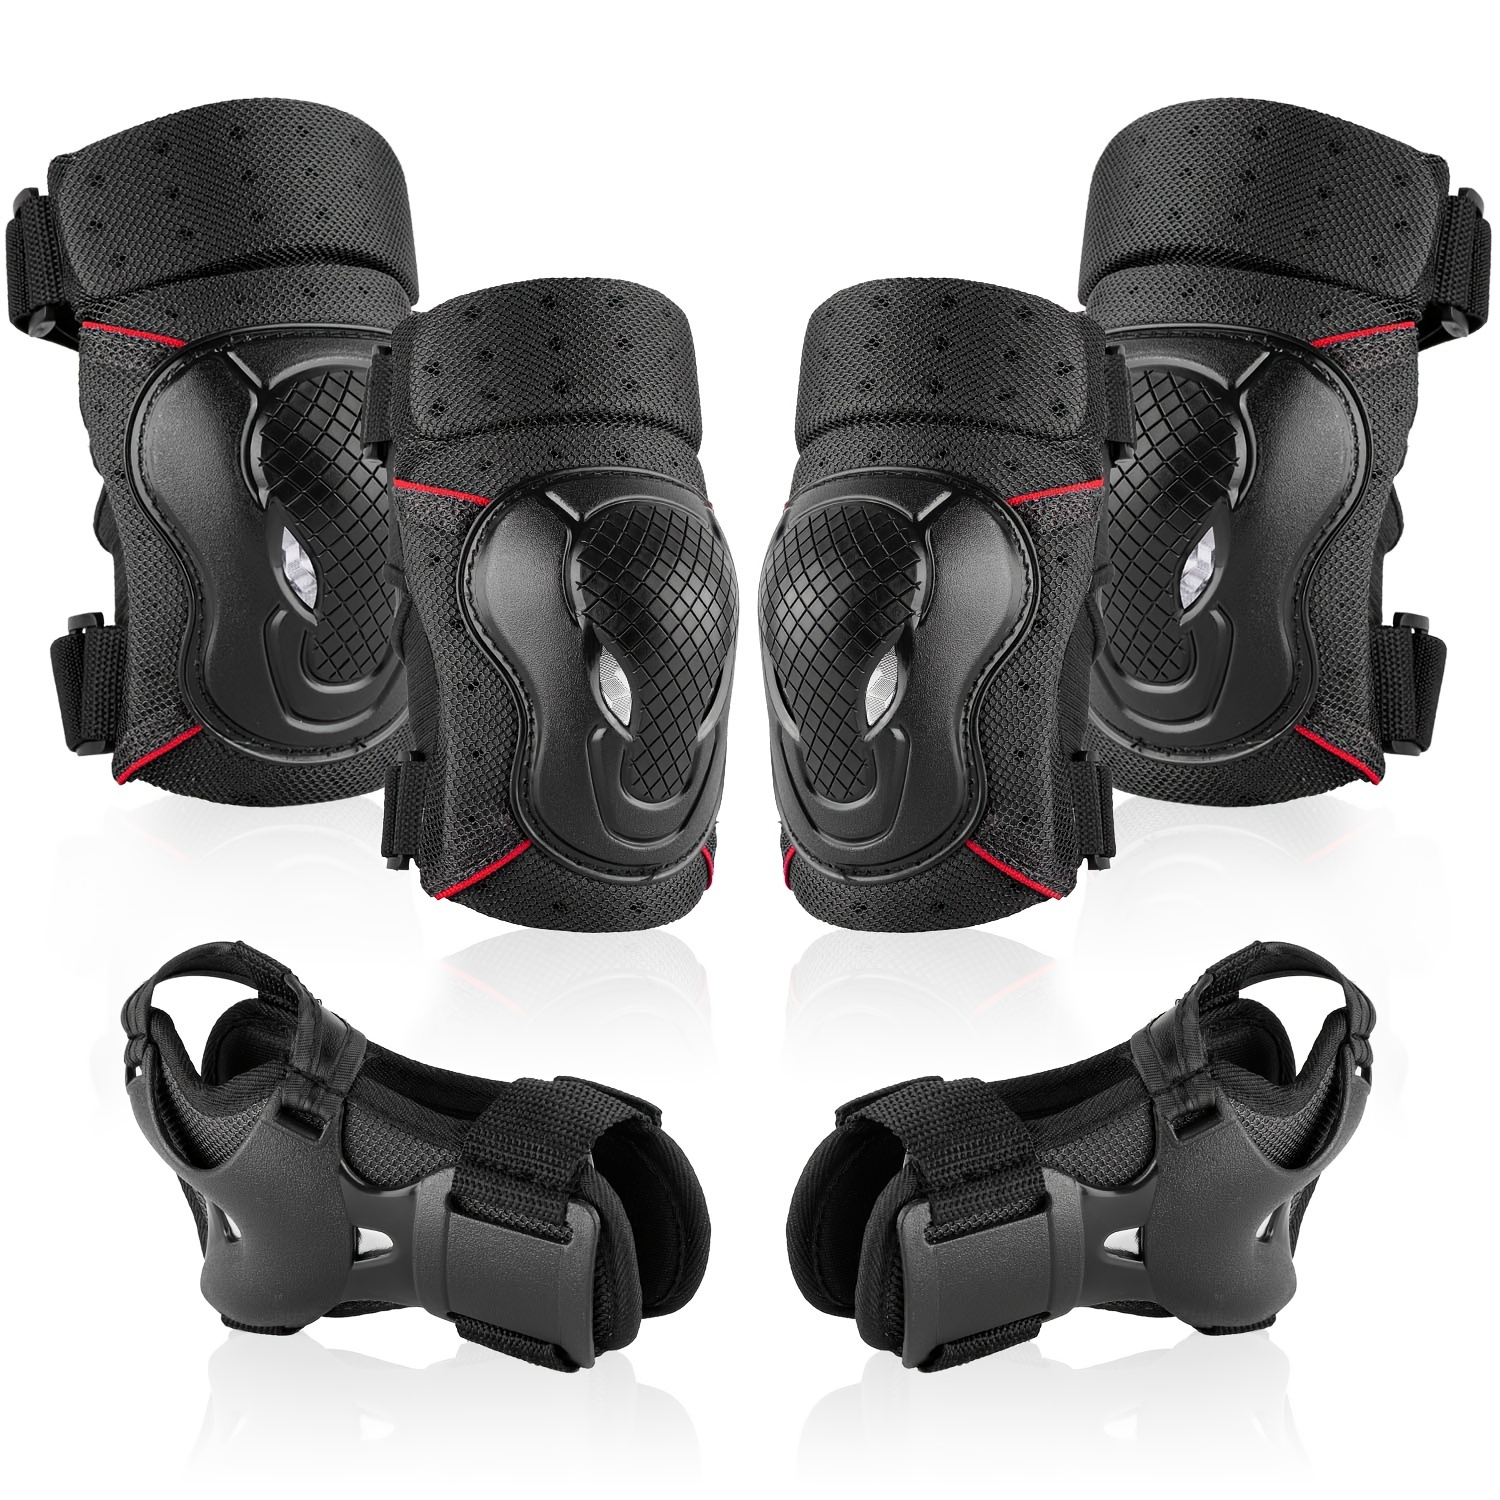 

Nhh 6-in-1 Set Ski Knee Pads & Elbow Pads & Wrist Guards, Protective Gear Set For Roller Skating Skateboarding Cycling Scooter & Skiing